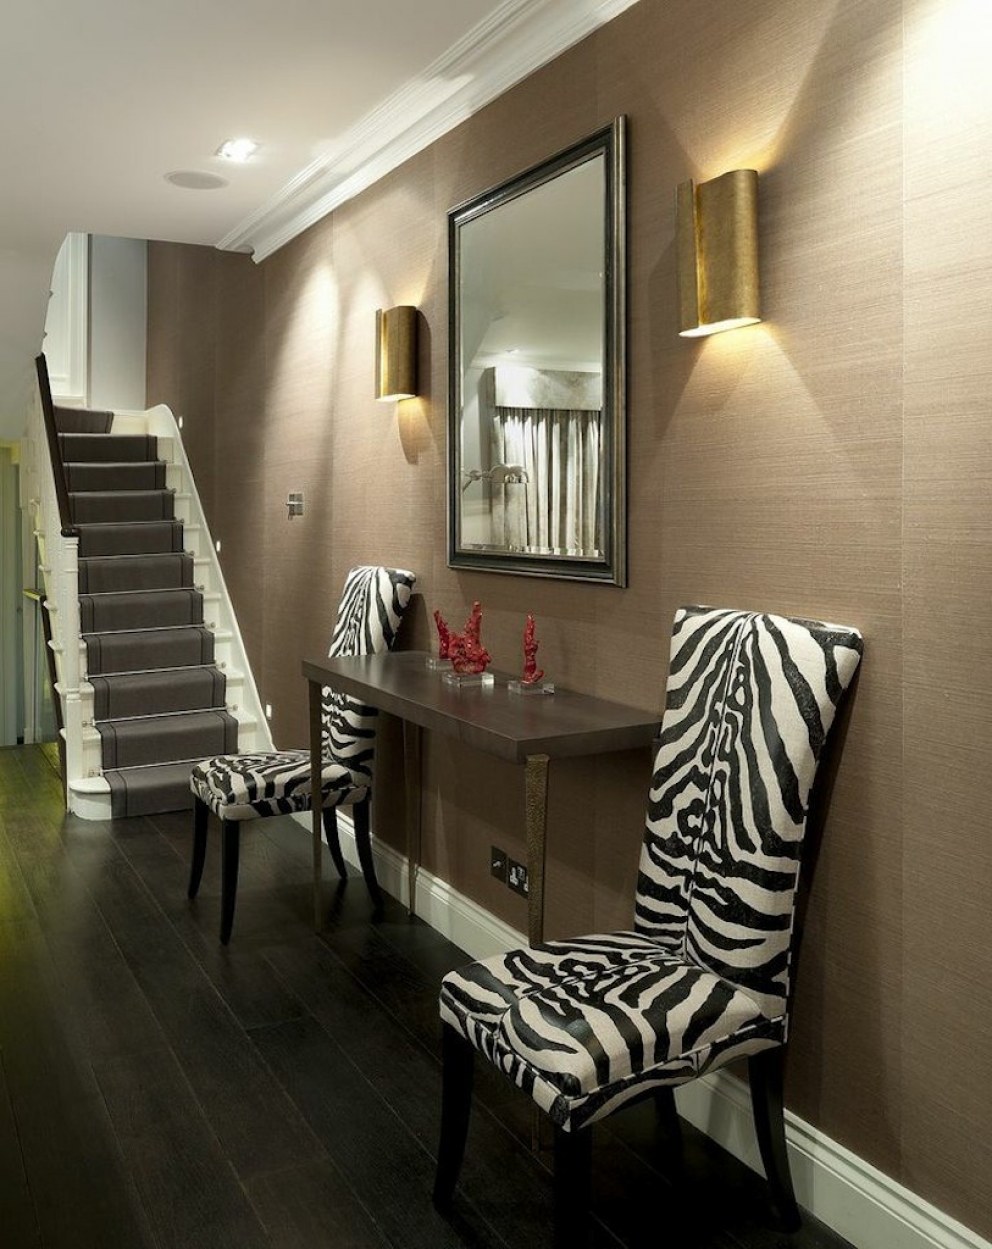 Complete renovation of a house in St. Anne's Terrace, St John's Wood, London | Hallway | Interior Designers